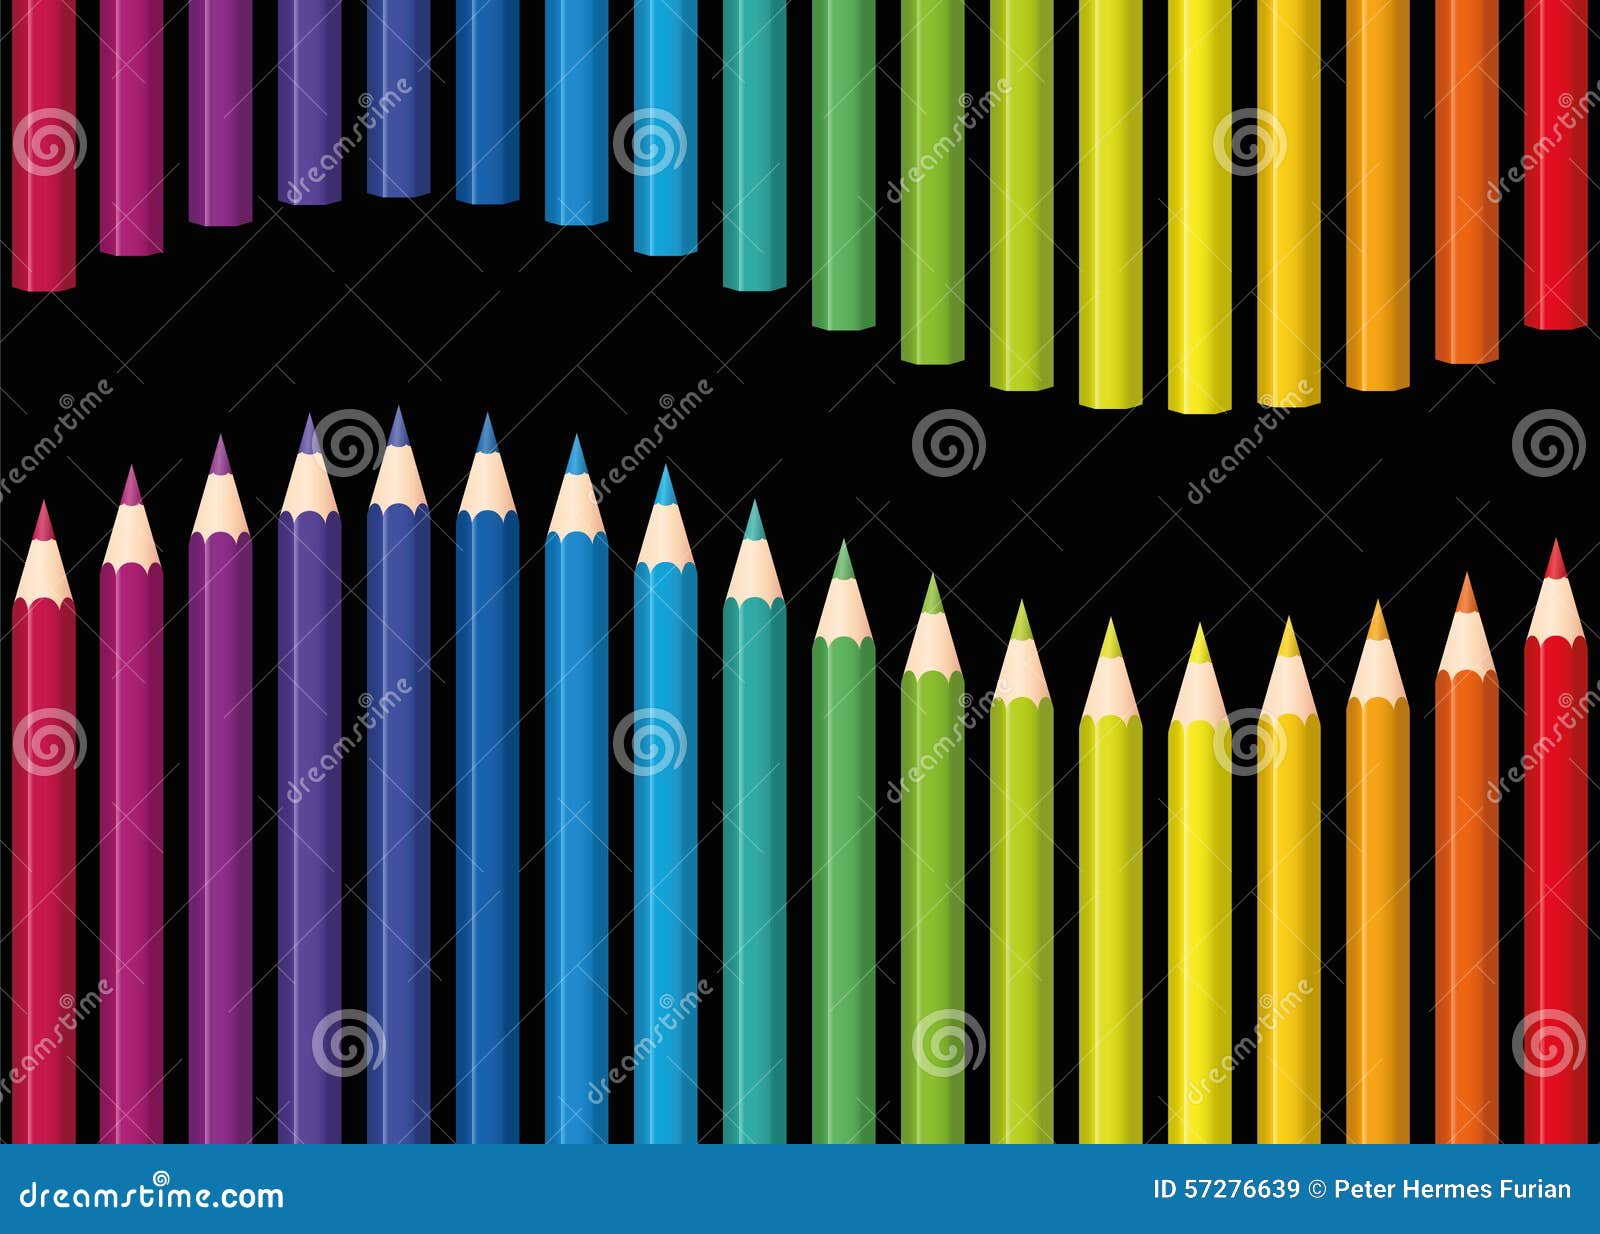 50 Rainbow Crayons Clipart  Rainbow crayons, Coloring for kids, Clip art